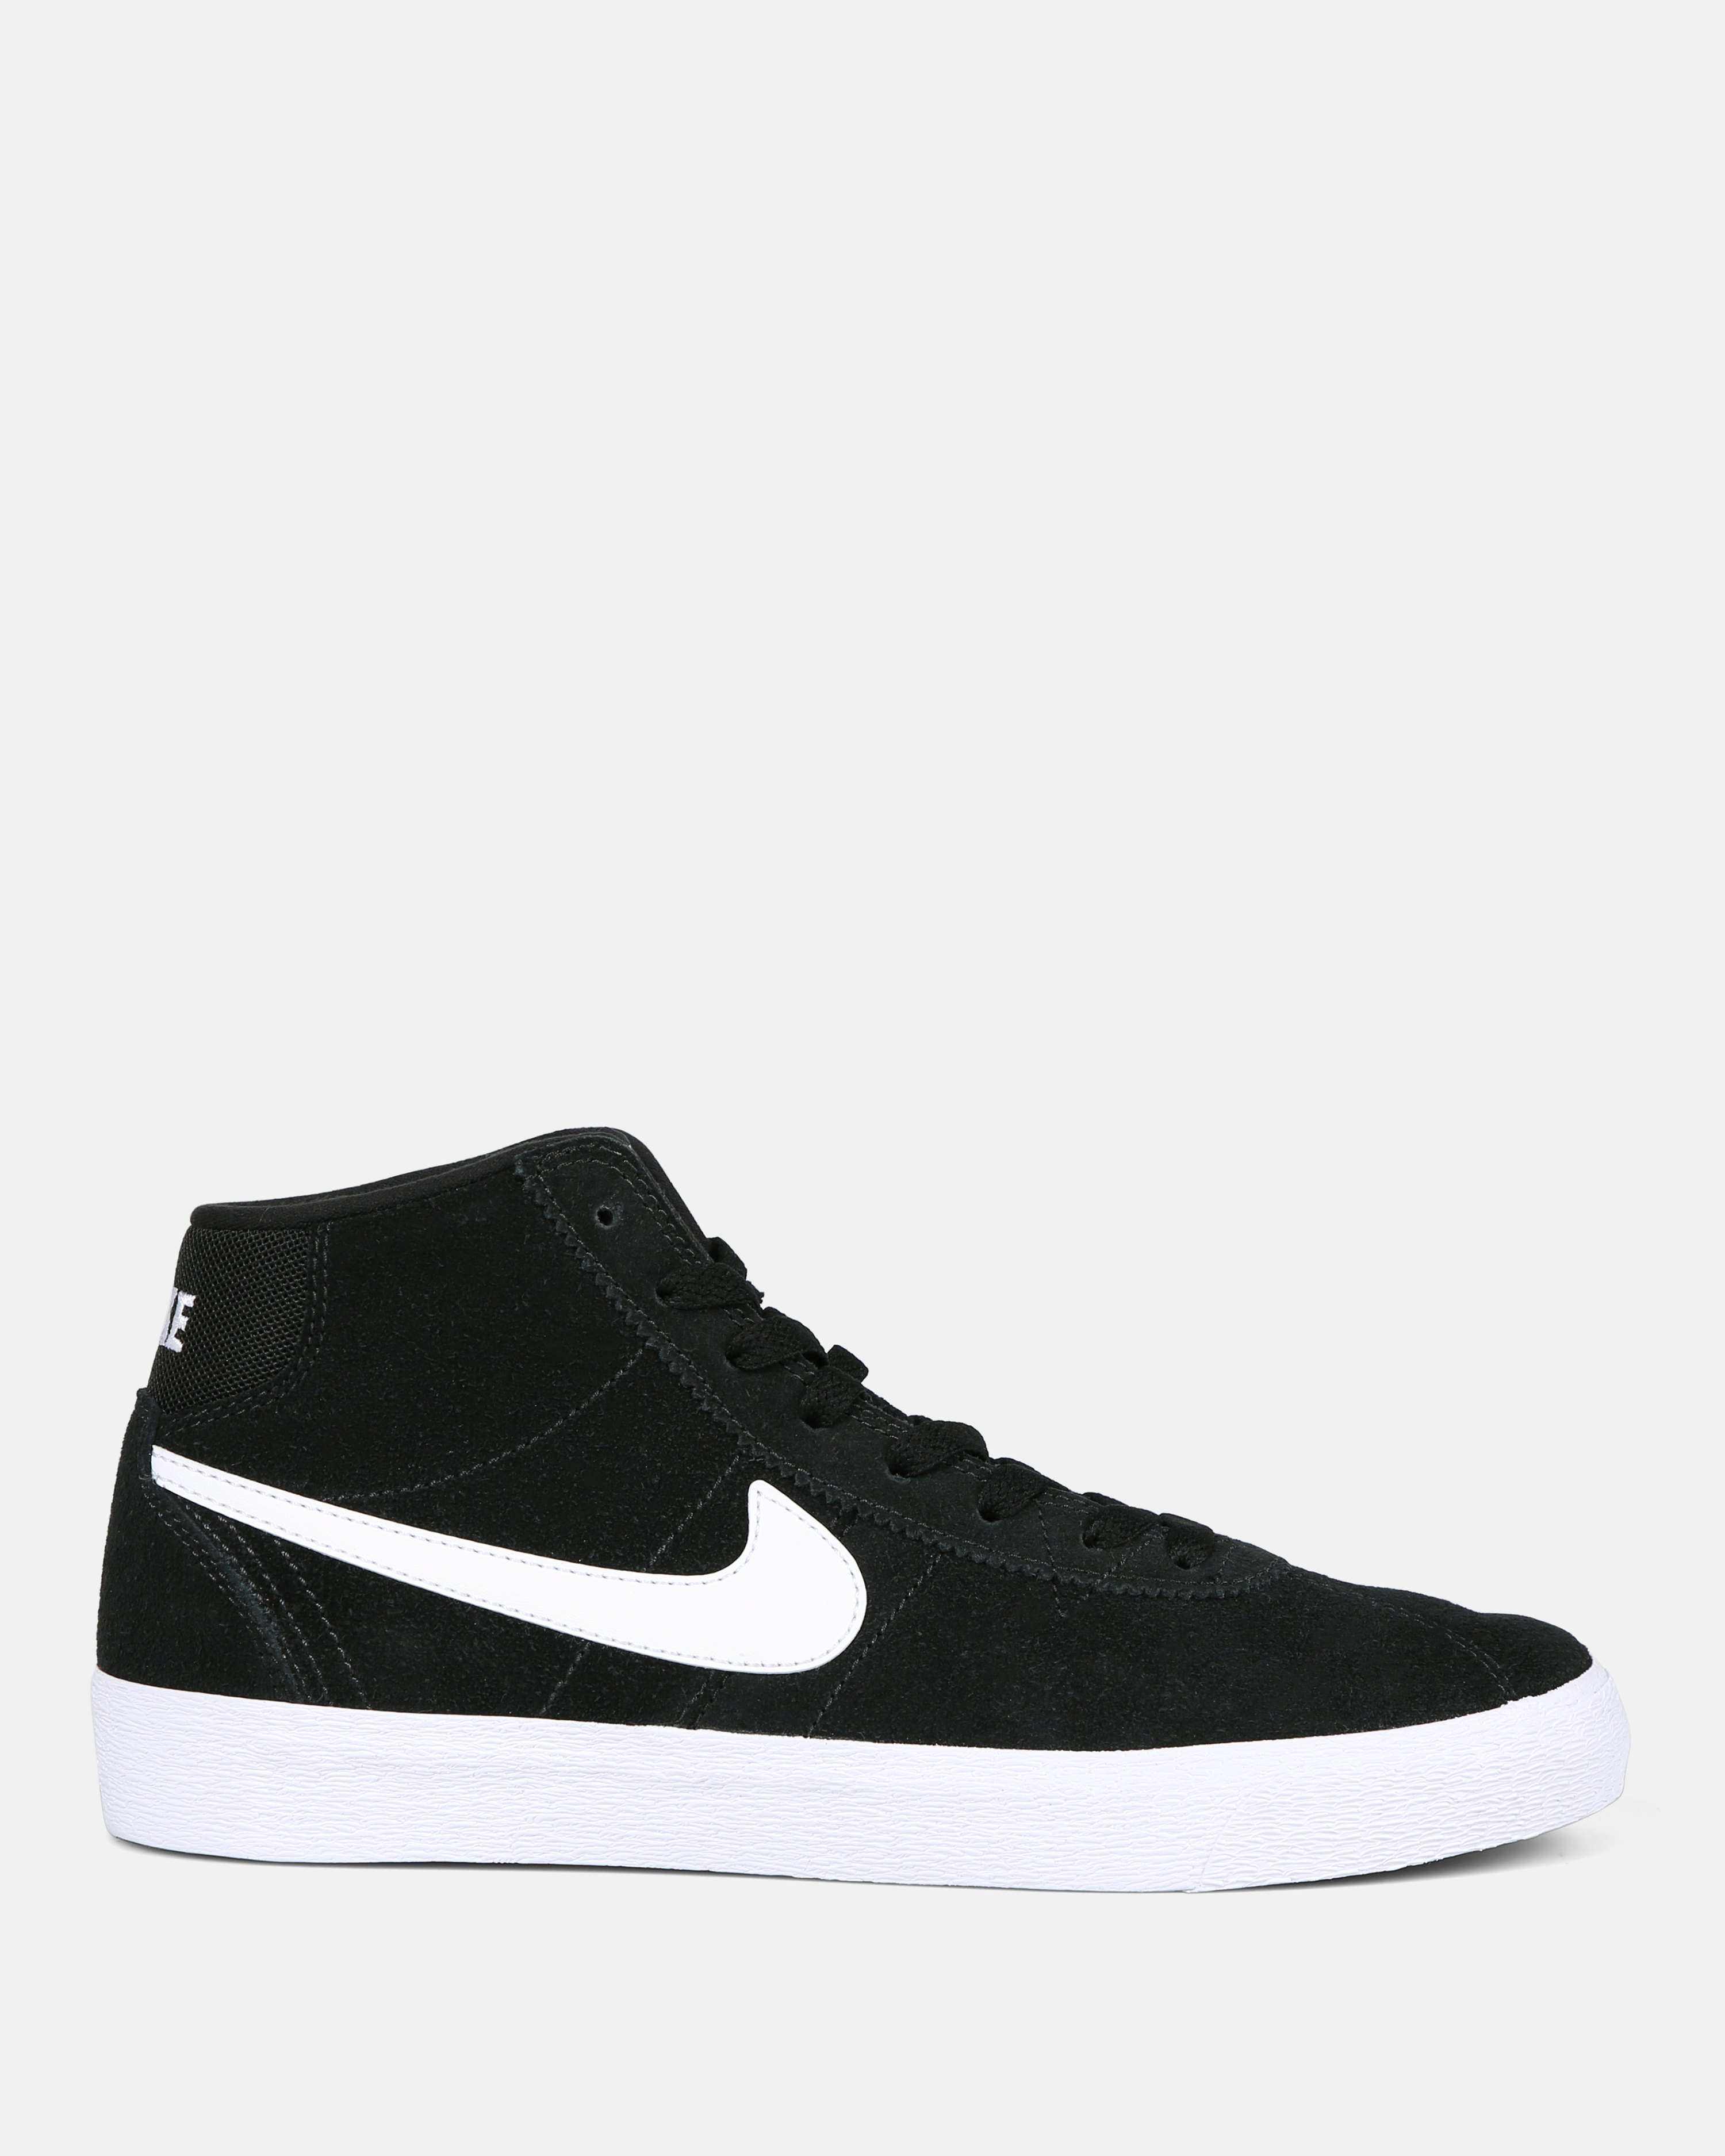 nike sb shoes afterpay